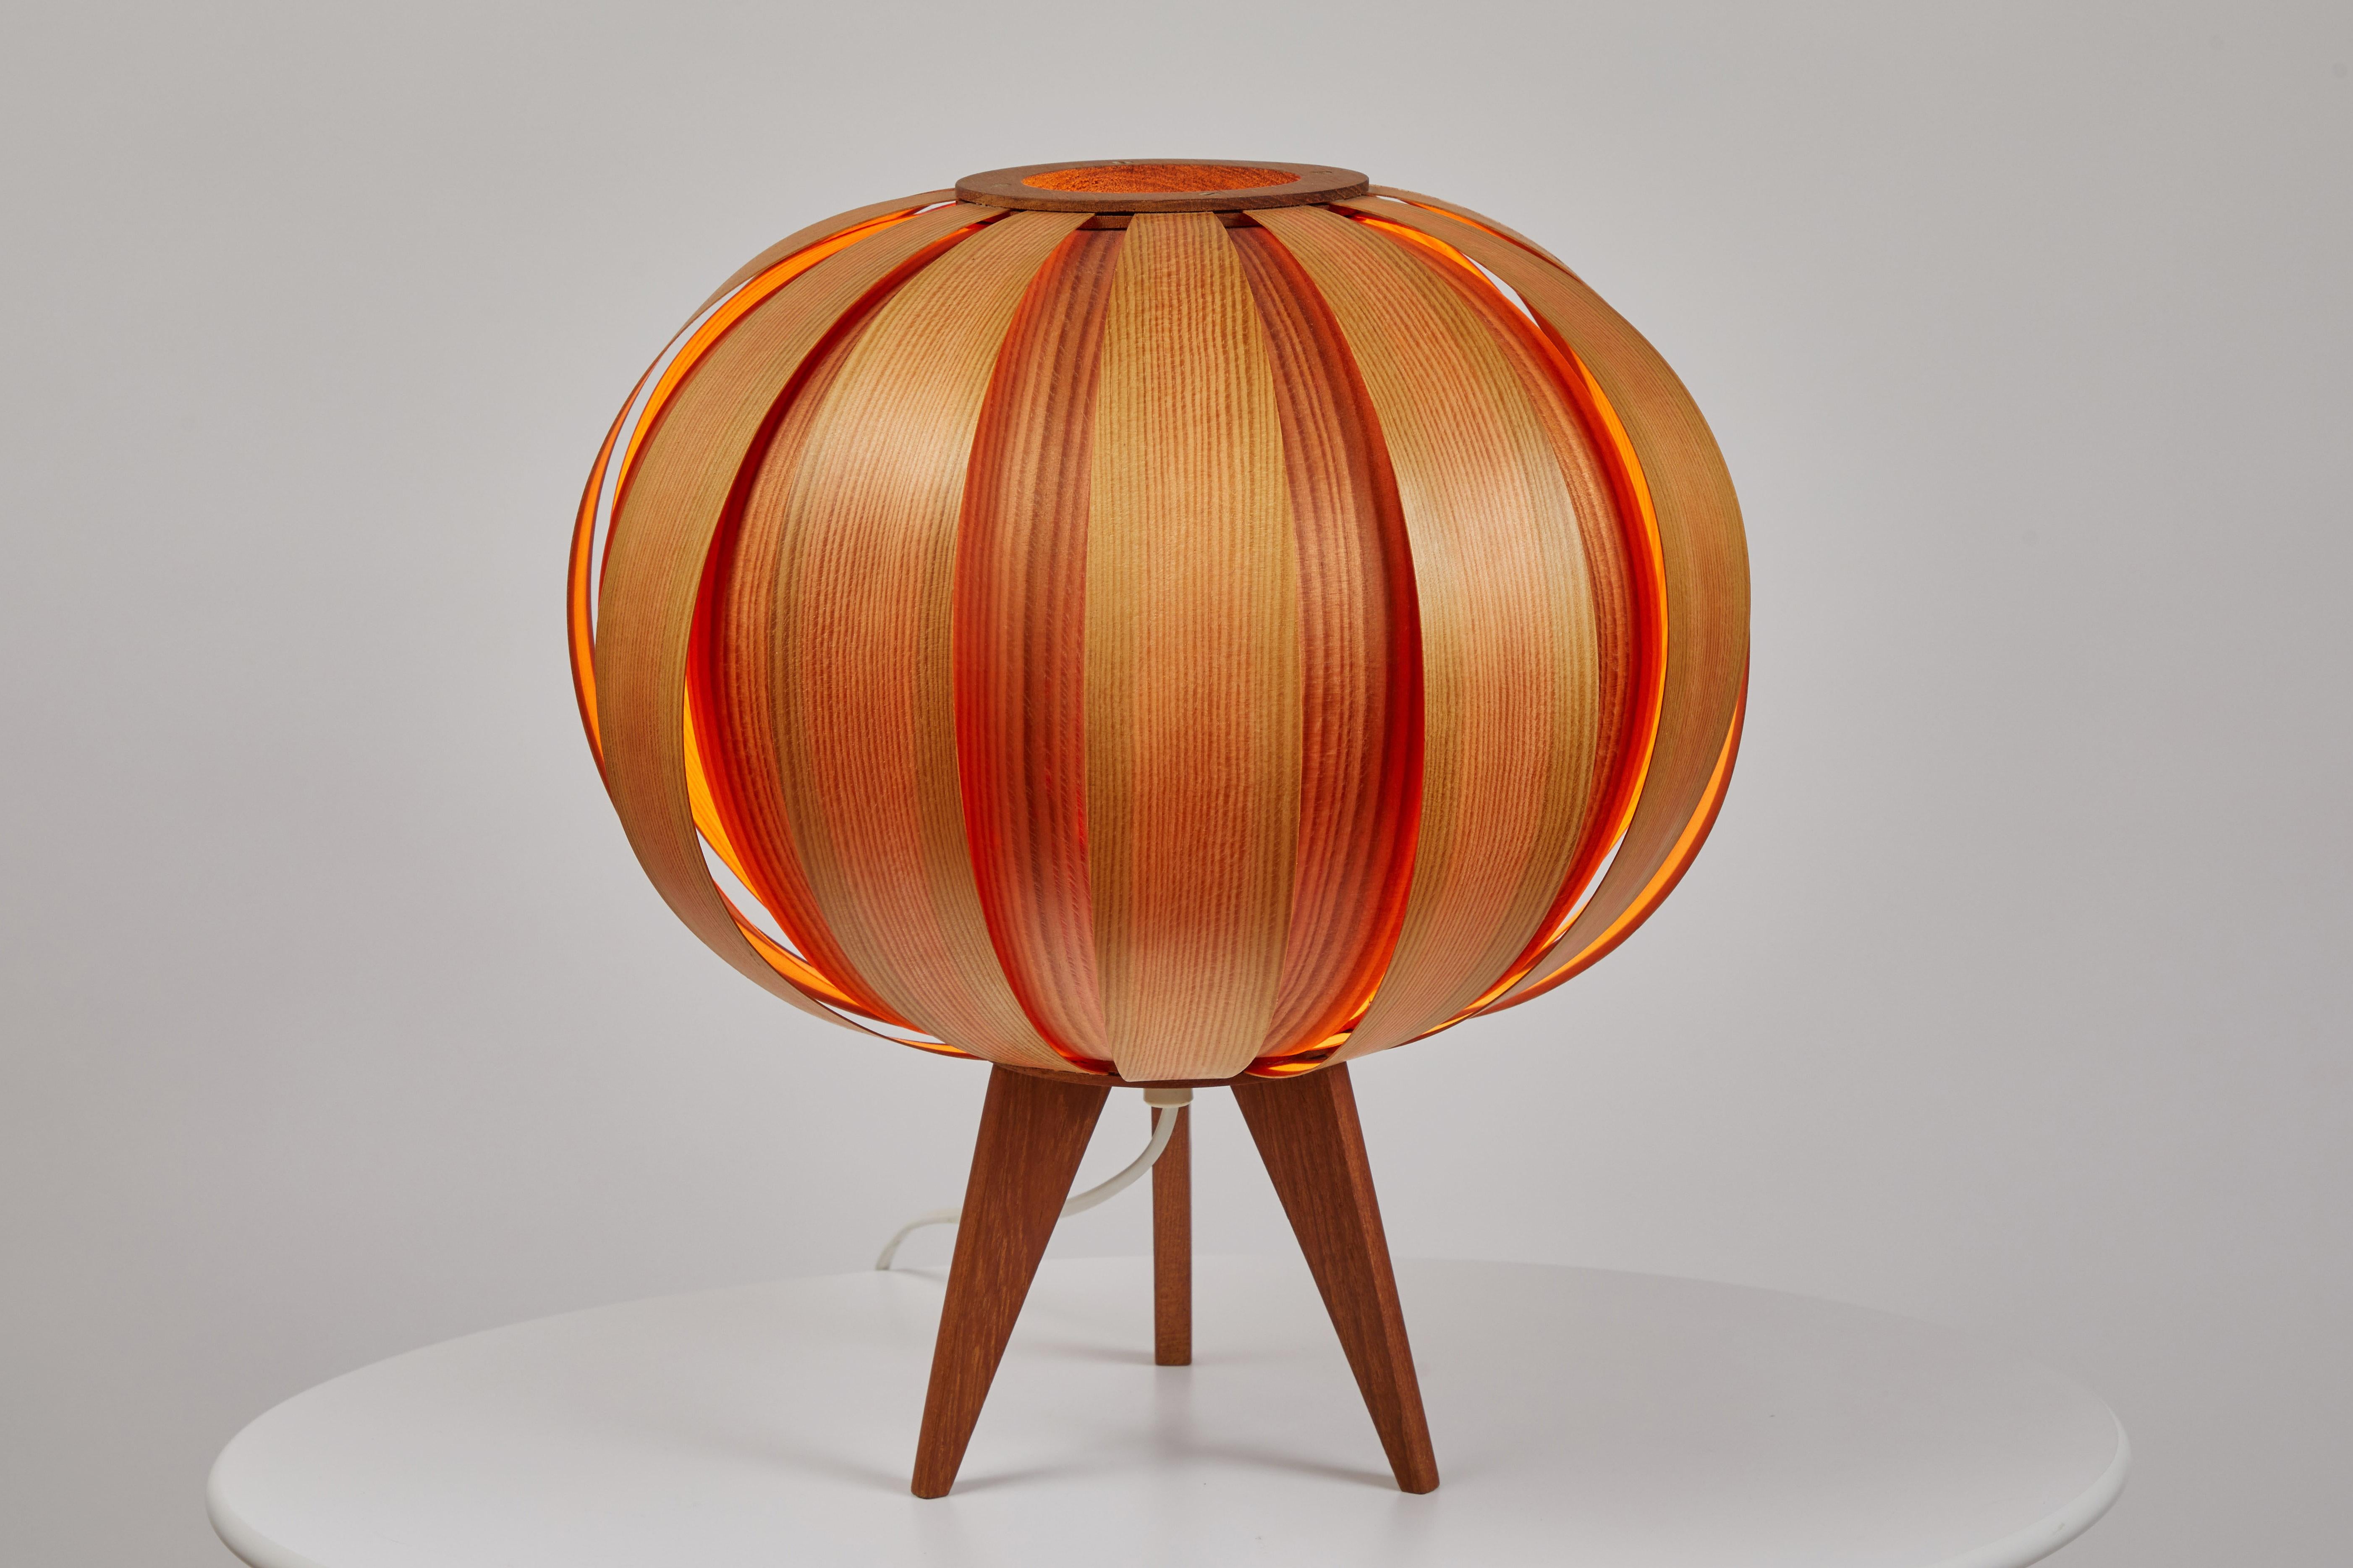 1960s Hans-Agne Jakobsson wood table lamp for AB Ellysett. Designed and produced by Jakobsson in Markaryd, Sweden and executed in thin bentwood with solid wood base. A uniquely architectural and rare lamp that is so incredibly delicate in its